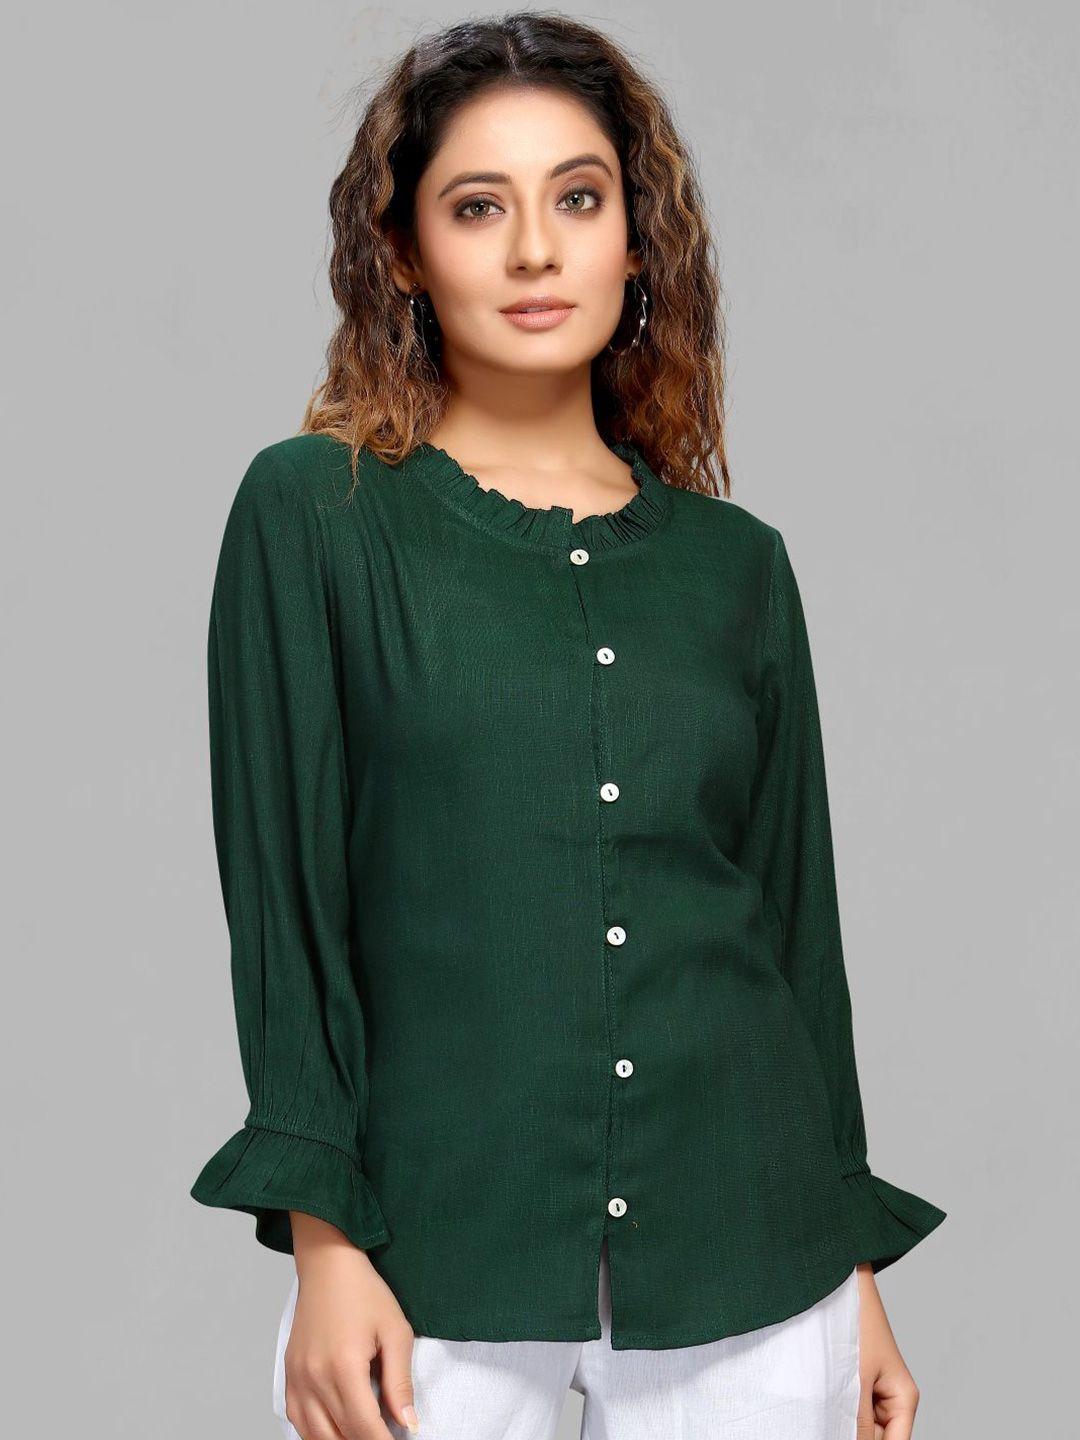 maiyee-round-neck-puff-sleeve-shirt-style-top